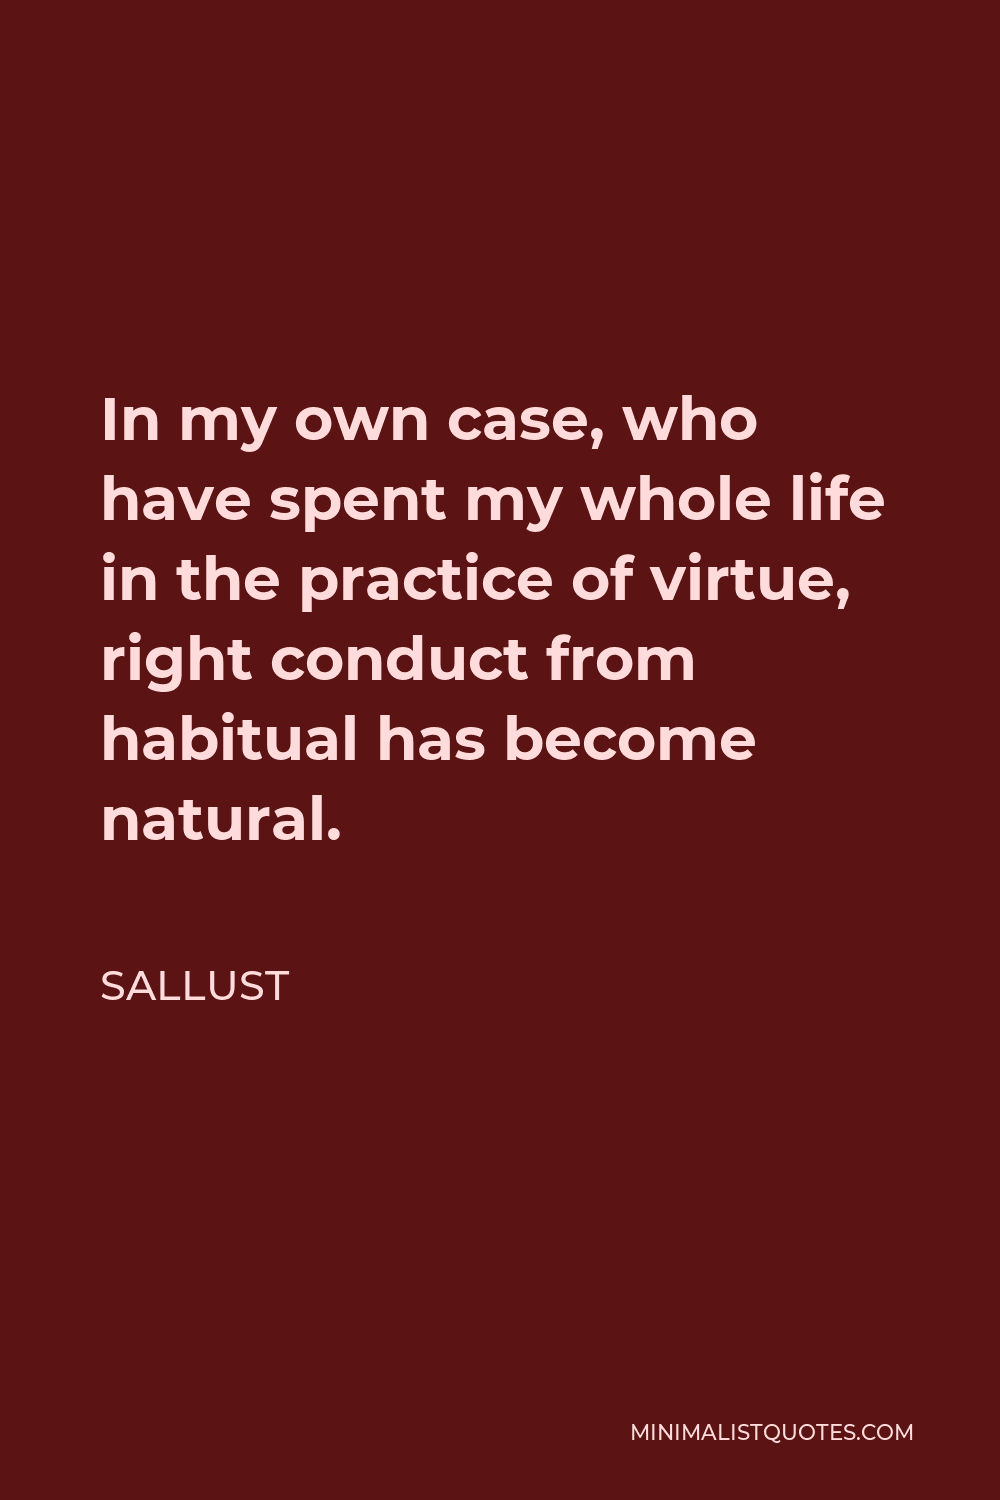 Sallust Quote - In my own case, who have spent my whole life in the practice of virtue, right conduct from habitual has become natural.